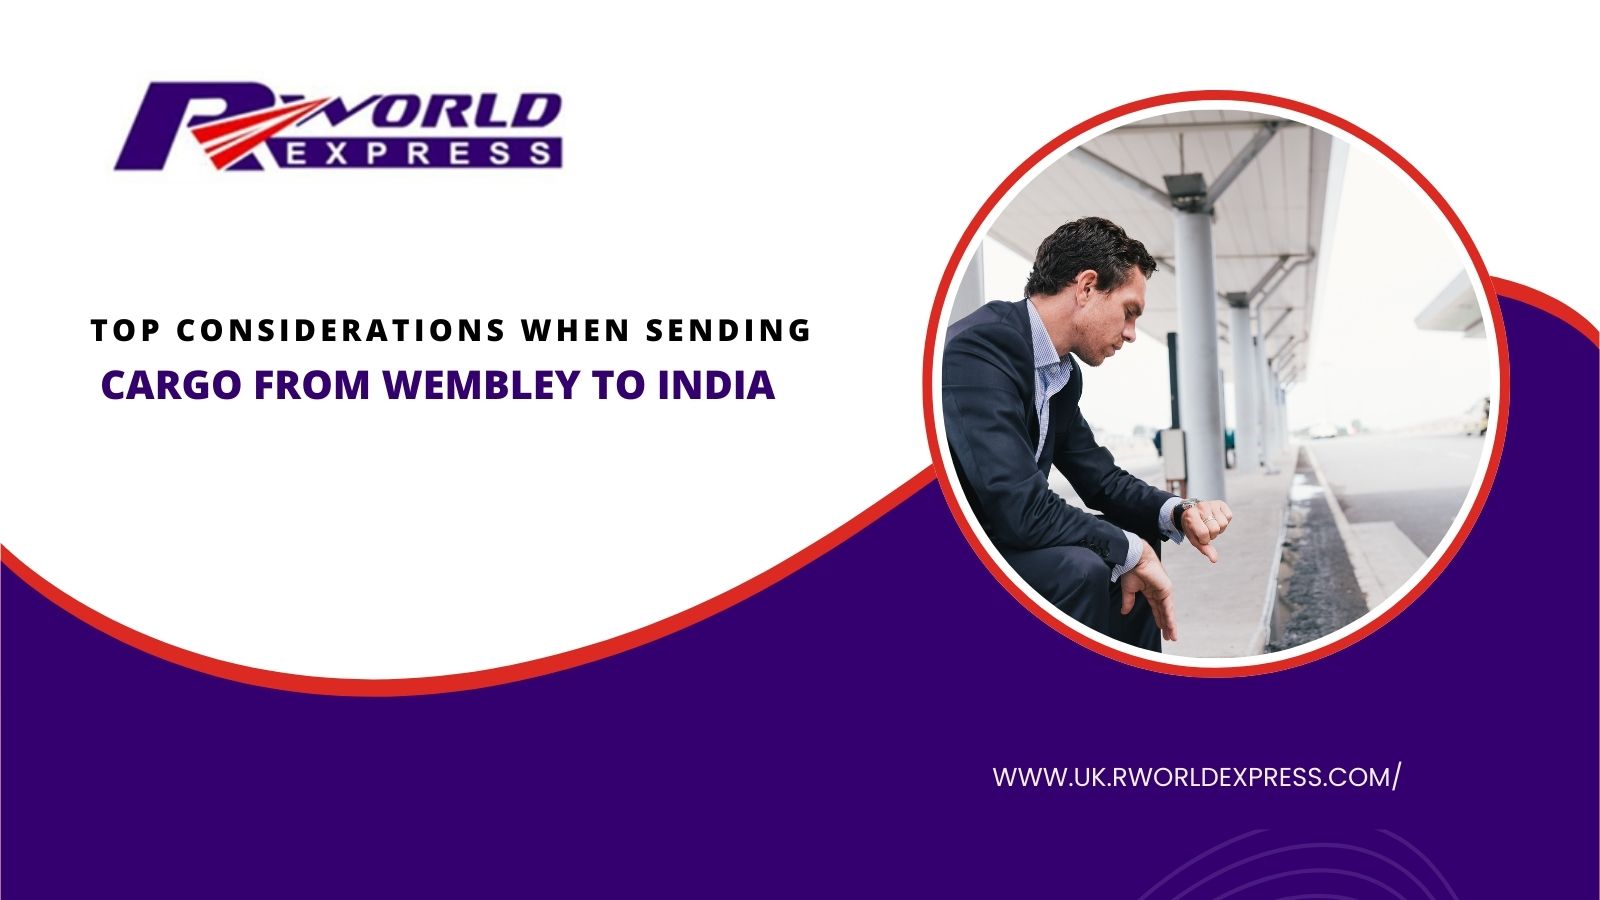 Cargo from Wembley to India